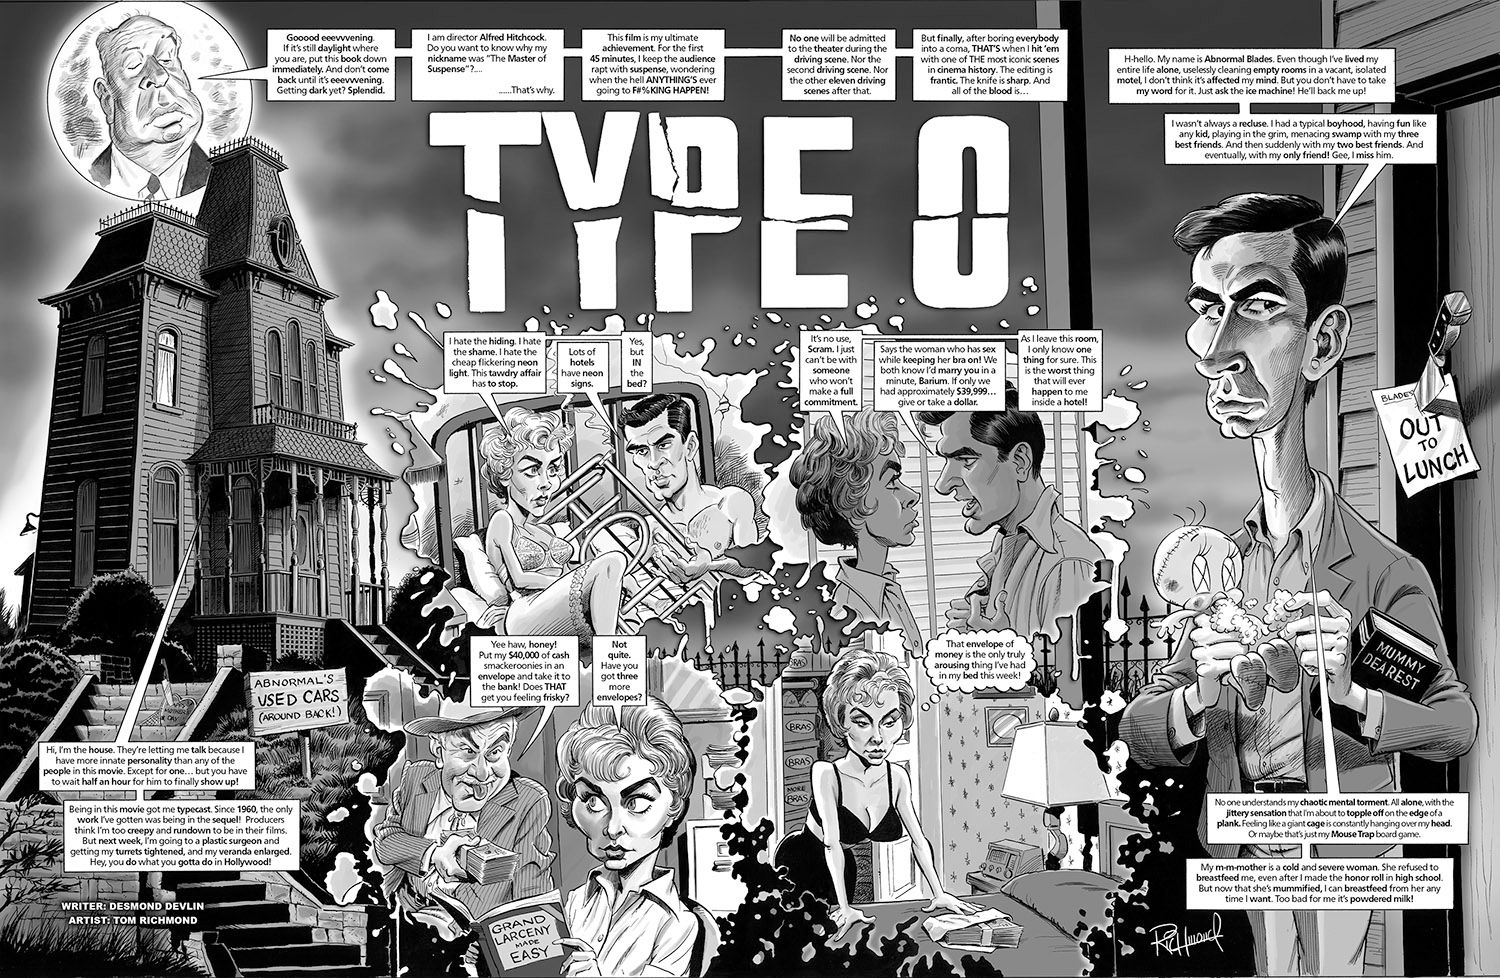 Desmond Devlin on X: @MickGarrisPM Here's a fourth face of Norman Bates,  in CLAPTRAP, the book of new parodies of classic films by two MAD Magazine  guys. (MAD doesn't publish 'em anymore